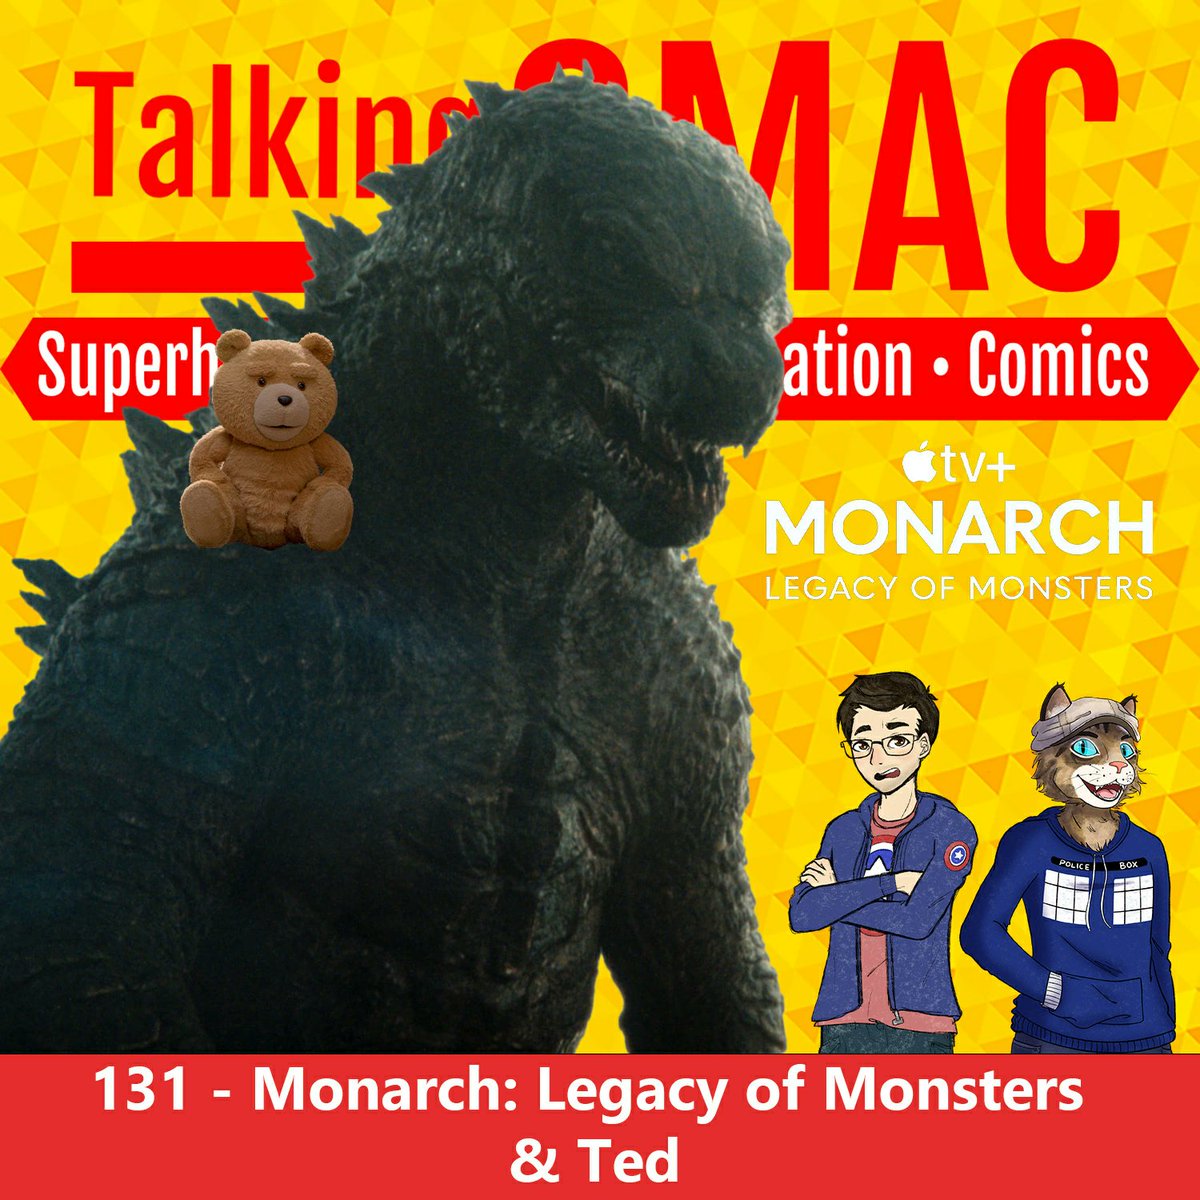 It's a double feature! Josh & Alex review #MonarchLegacyofMonsters & its implications for #GodzillaxKongTheNewEmpire as well as #TedSeries 

linktr.ee/TalkingSMAC

#Podnation #KaijuPodcast  #TVPodcast #MoviePodcast #NerdPodcast #Godzilla #Monsterverse #AppleTVPlus #PeacockTv